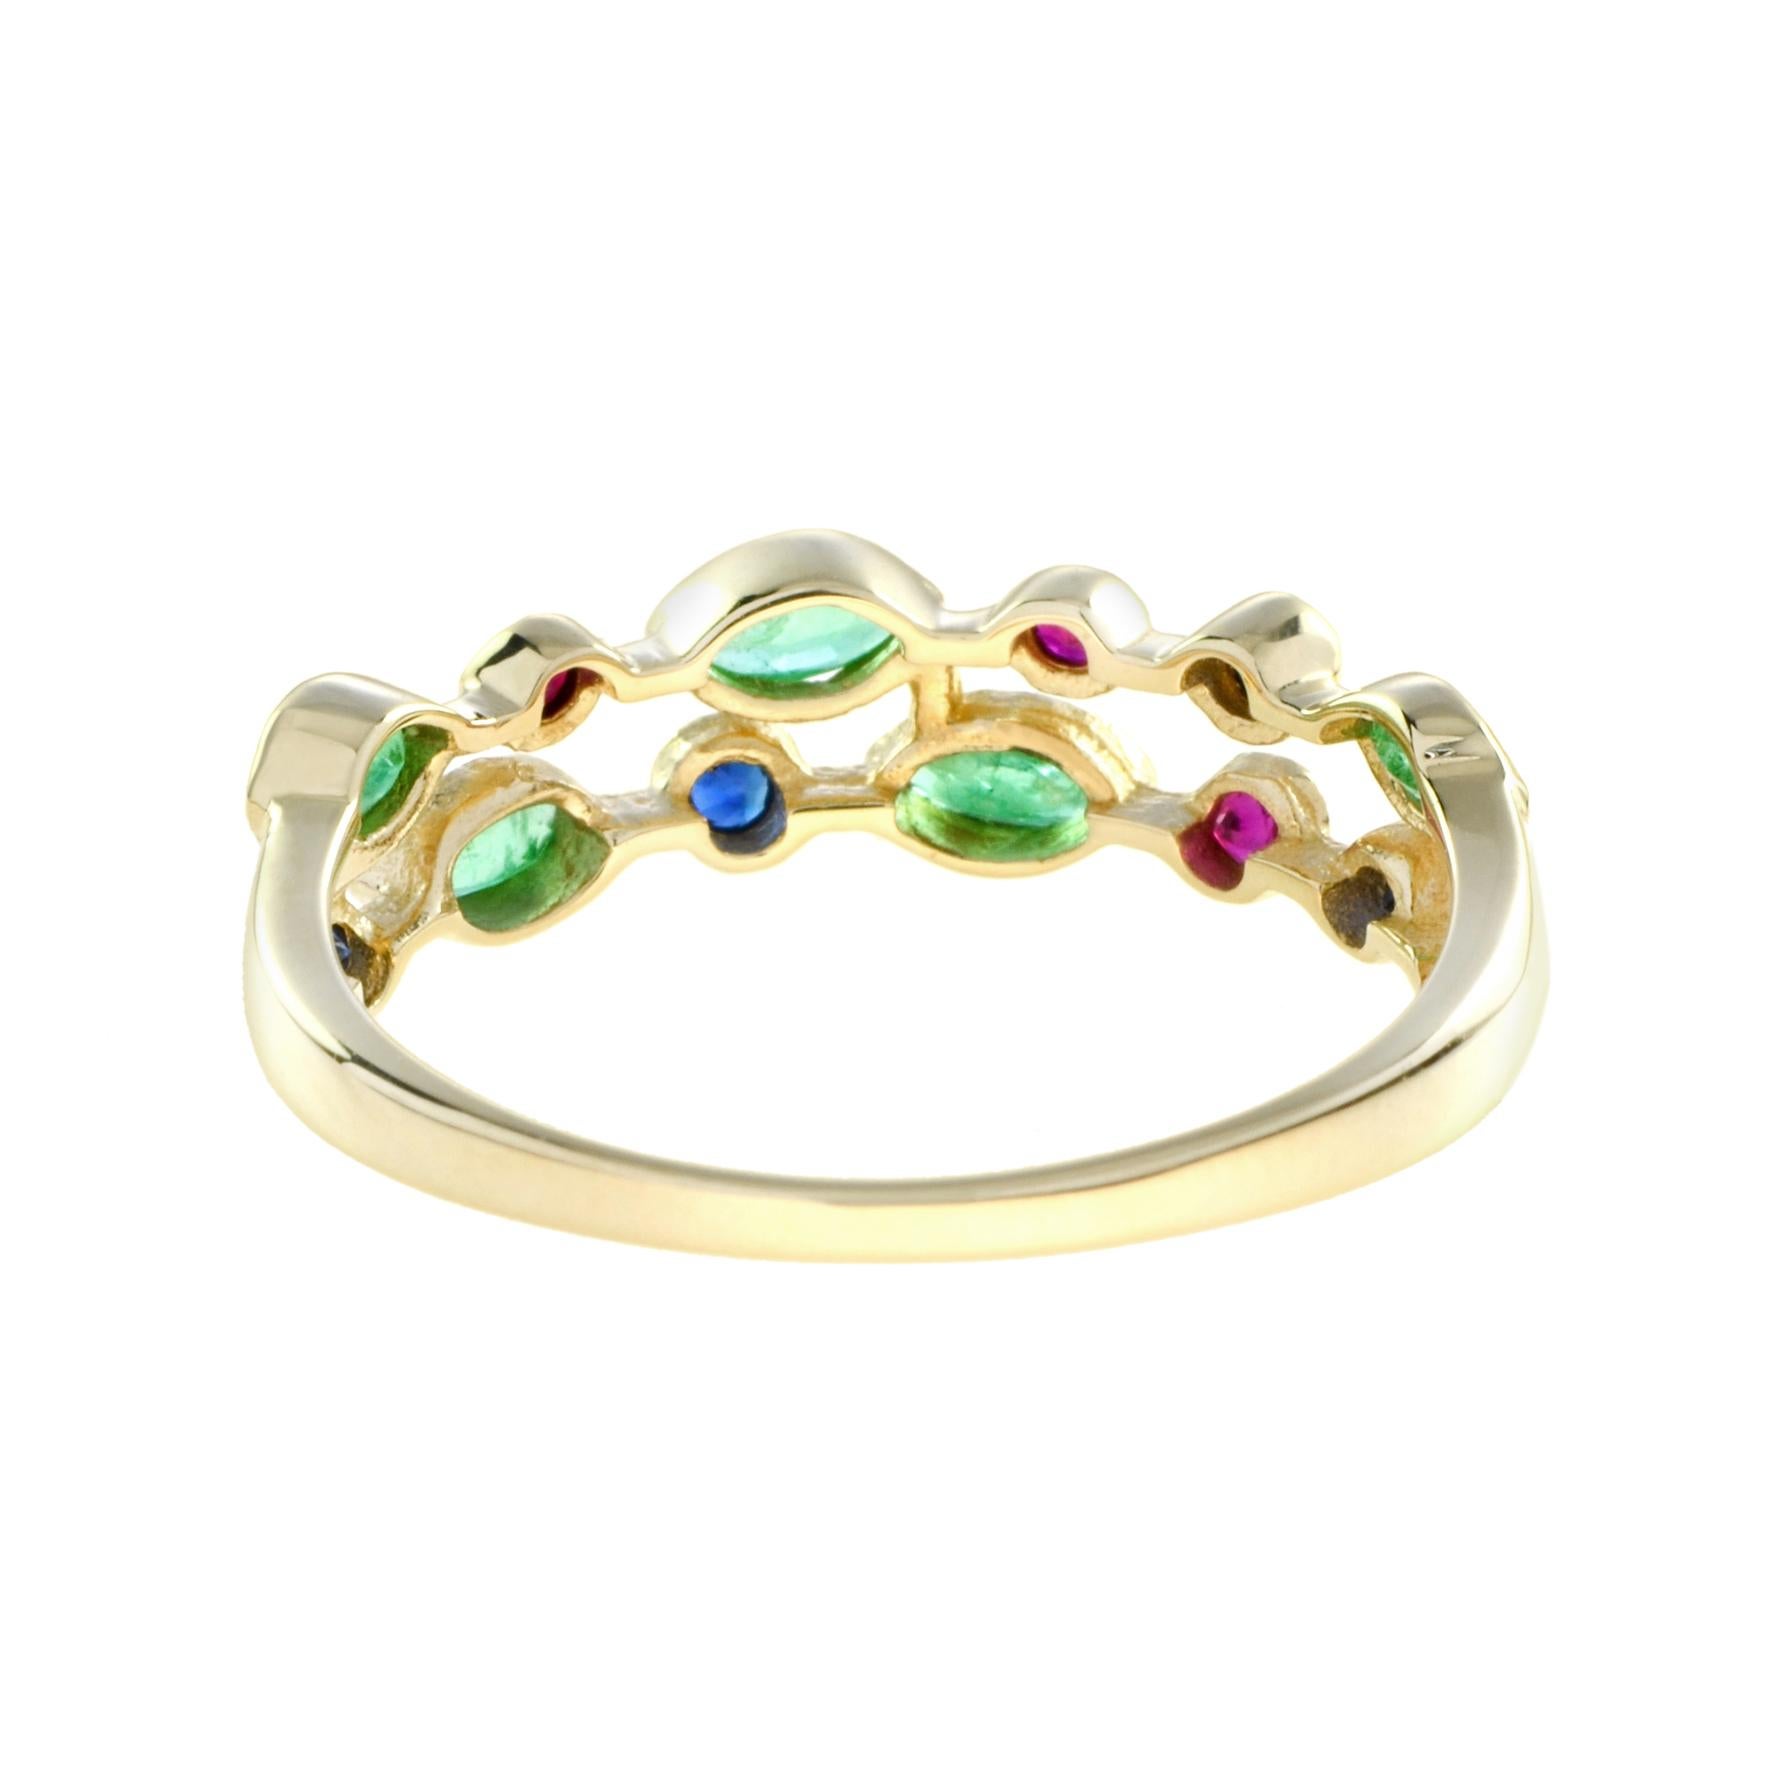 For Sale:  Double Row Emerald, Ruby and Sapphire Eternity Ring in 14K Yellow Gold 6